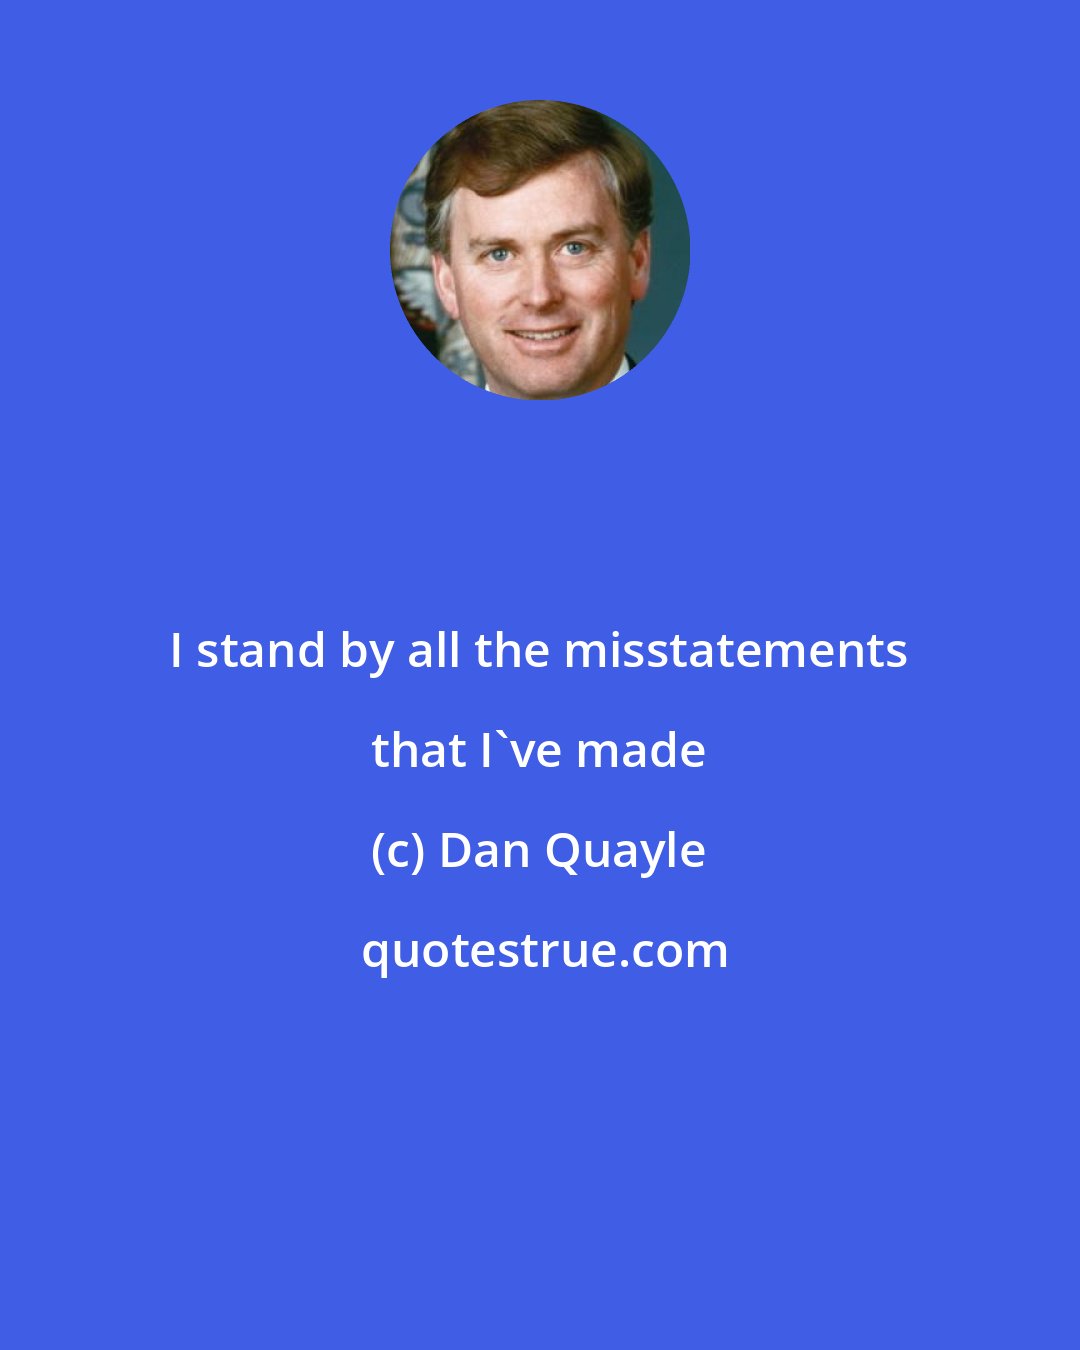 Dan Quayle: I stand by all the misstatements that I've made